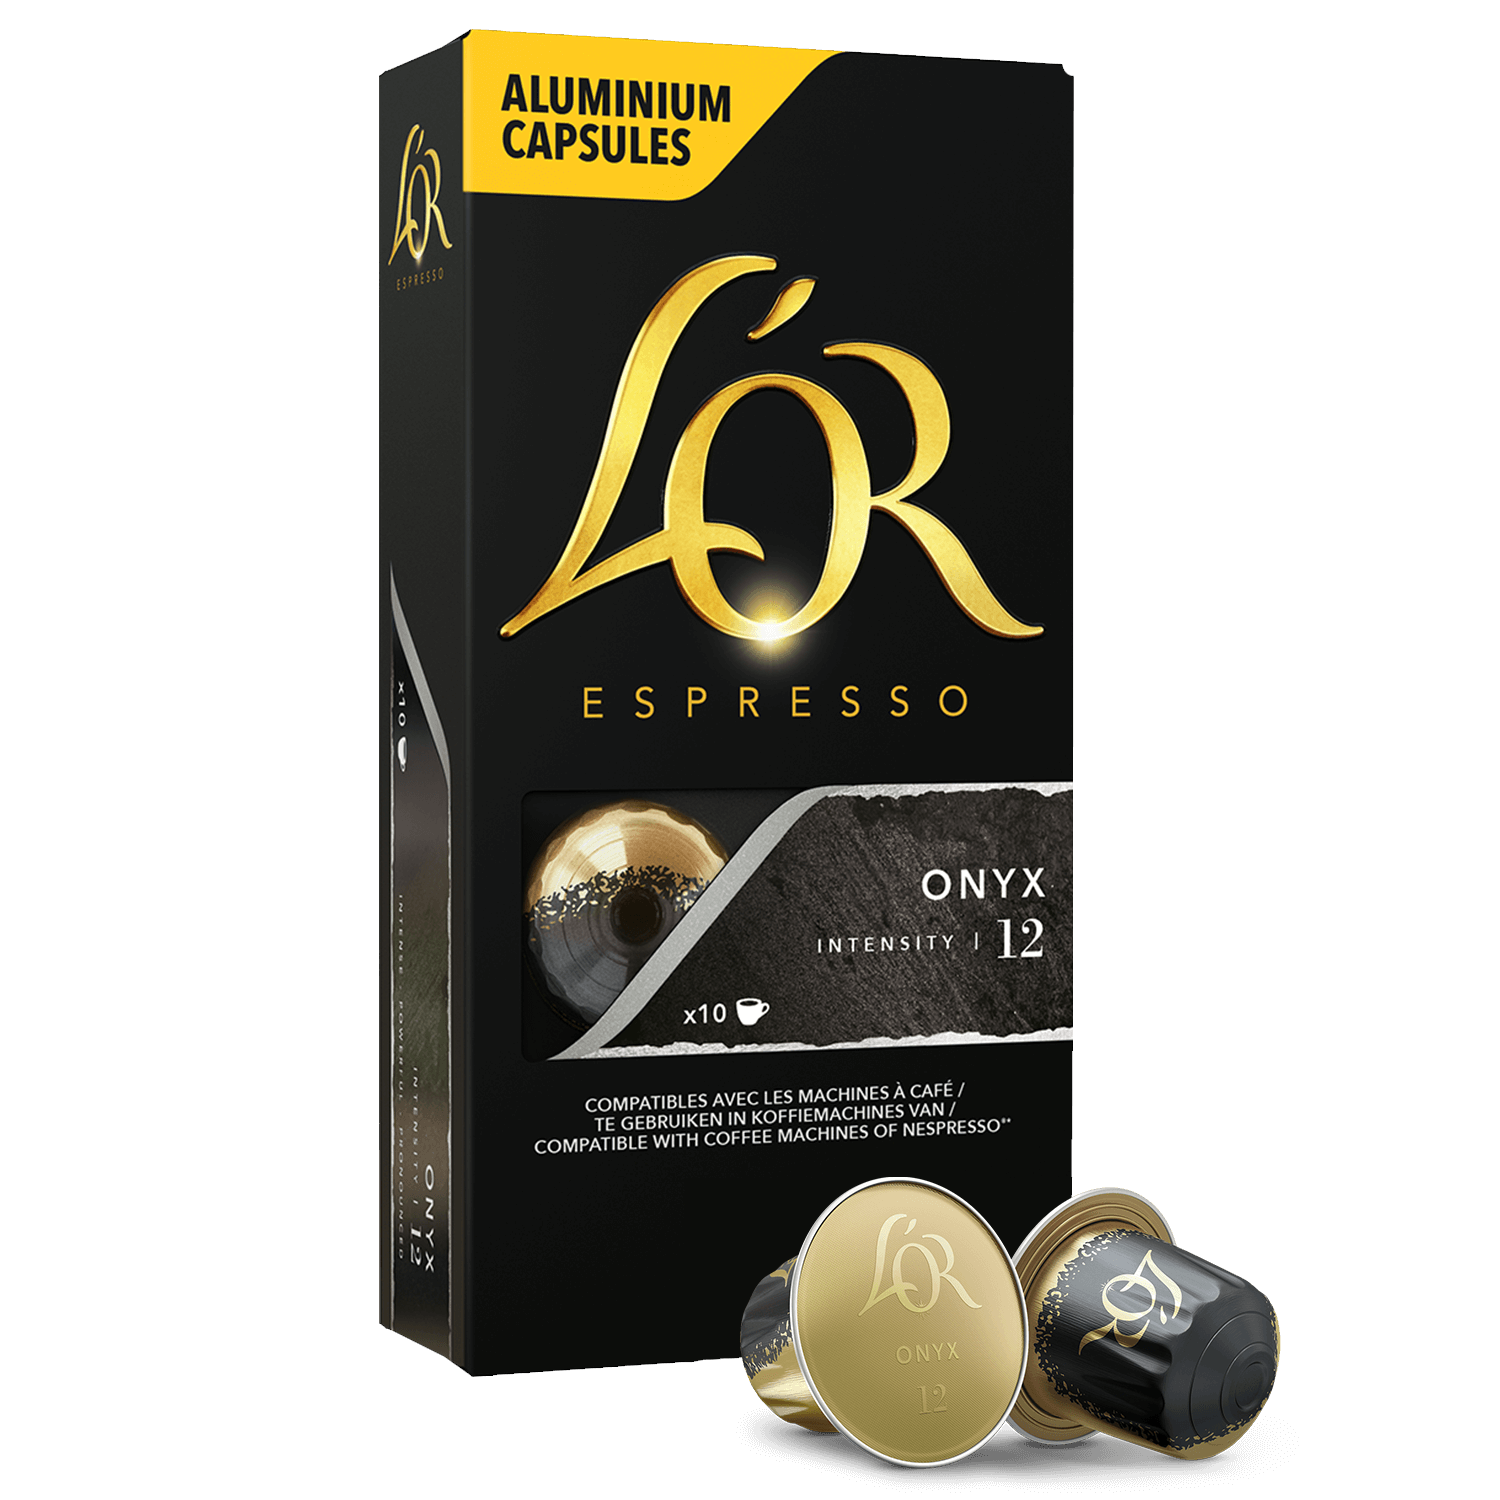 L'OR Lungo Colombia